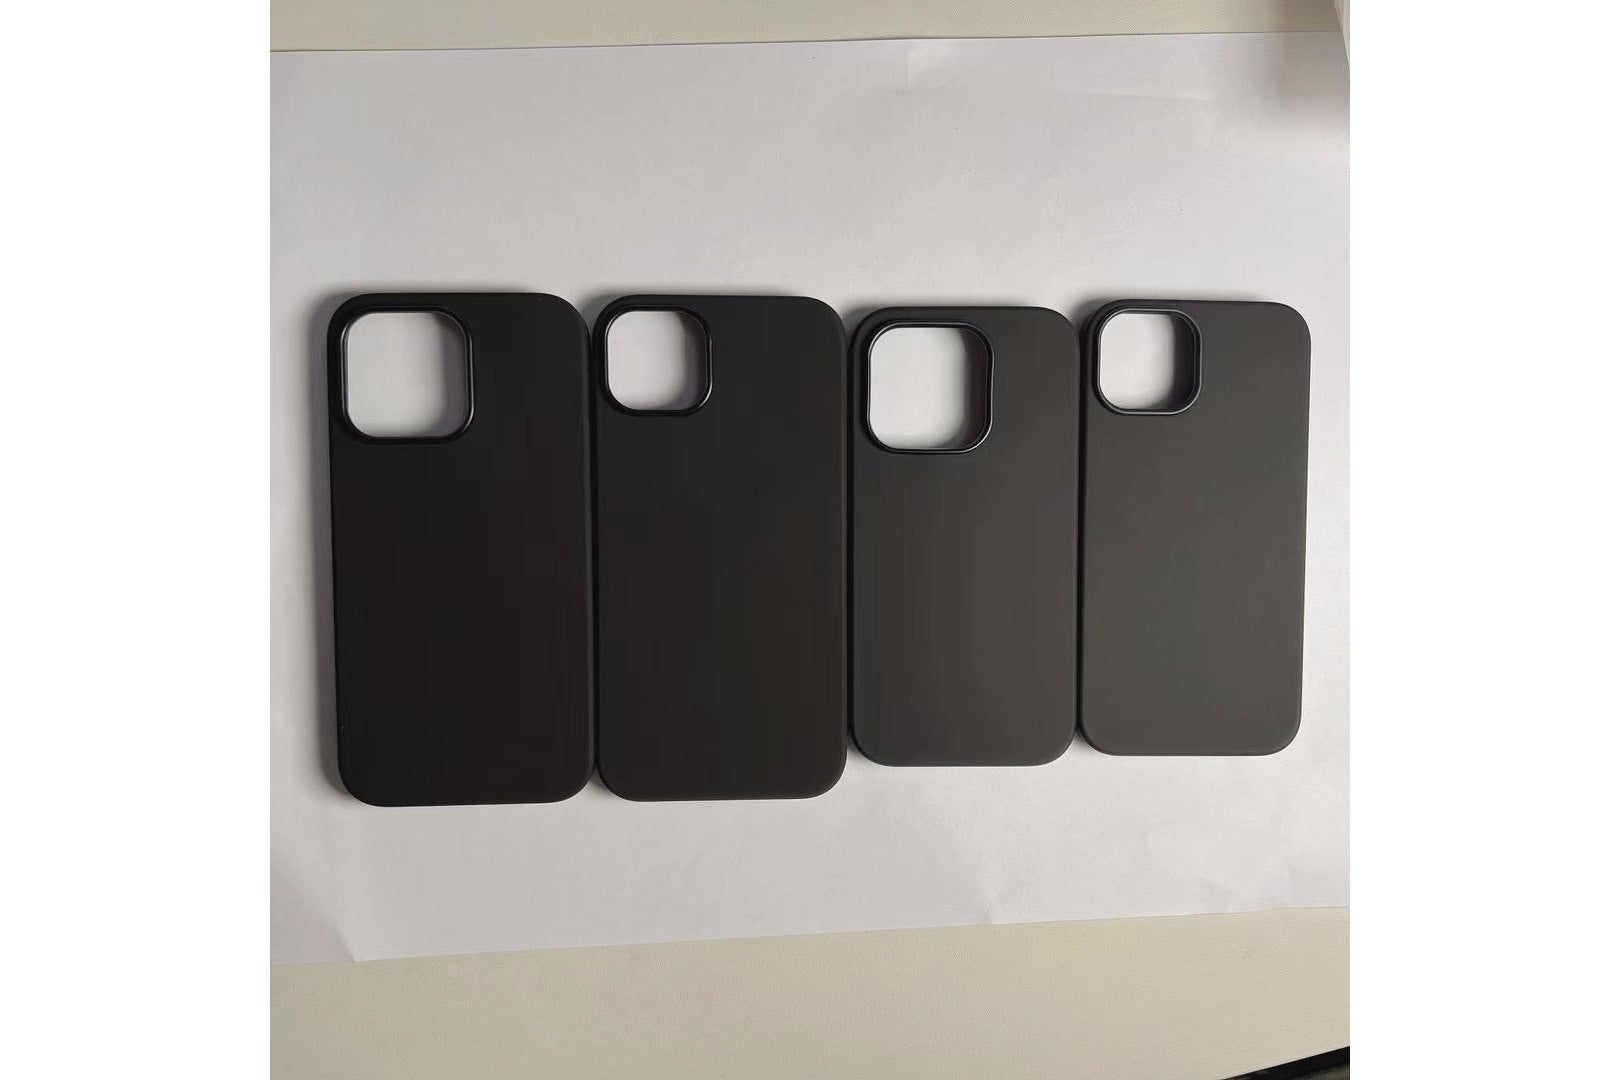 Leaked iPhone 14 cases - iPhone 14 Pro camera bump will be huge compared to regular models, leaked case image suggests